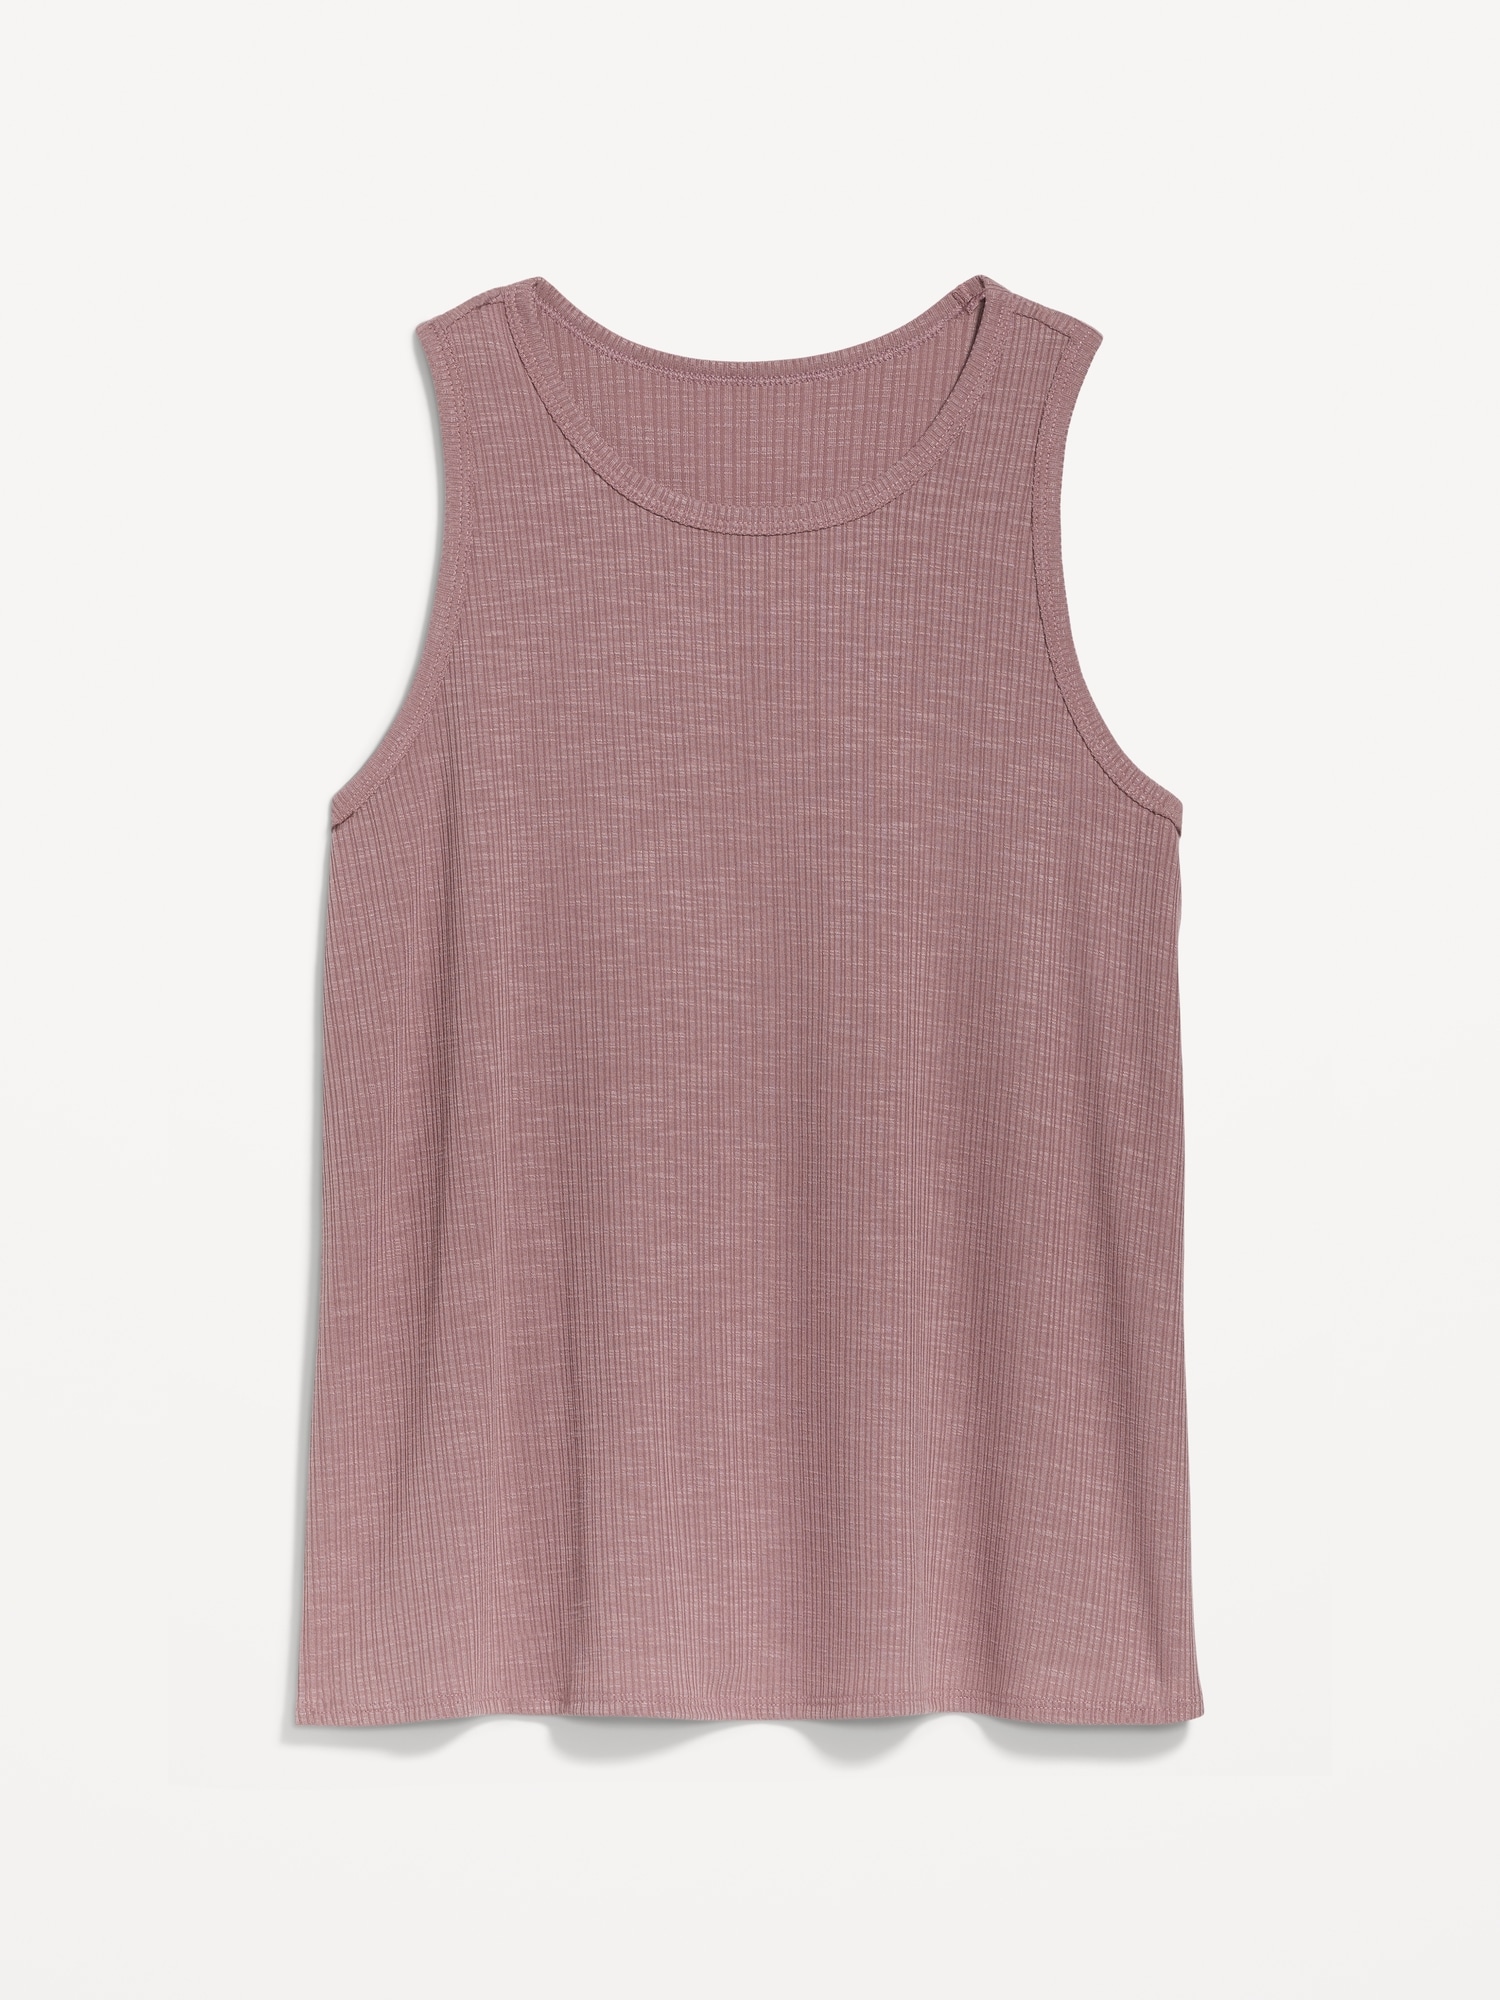 Old Navy Women's Luxe Swing Tank Top - White - Tall Size XL